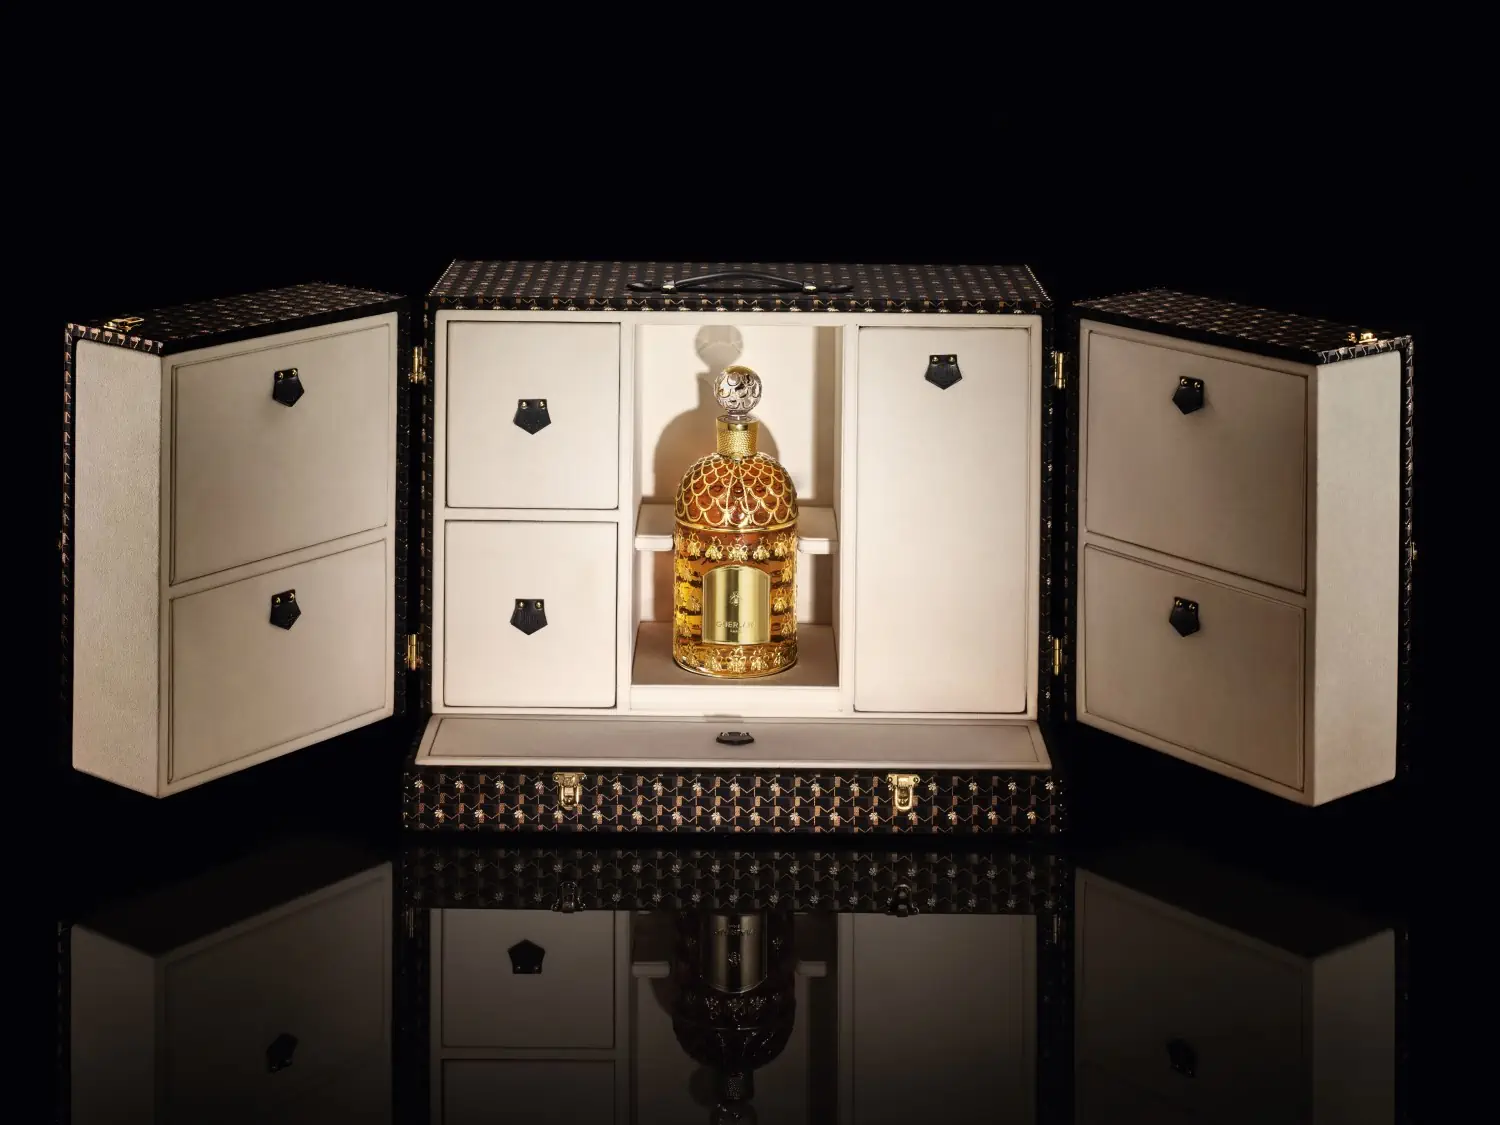 Moynat x Guerlain unites in an unmatched timeless union